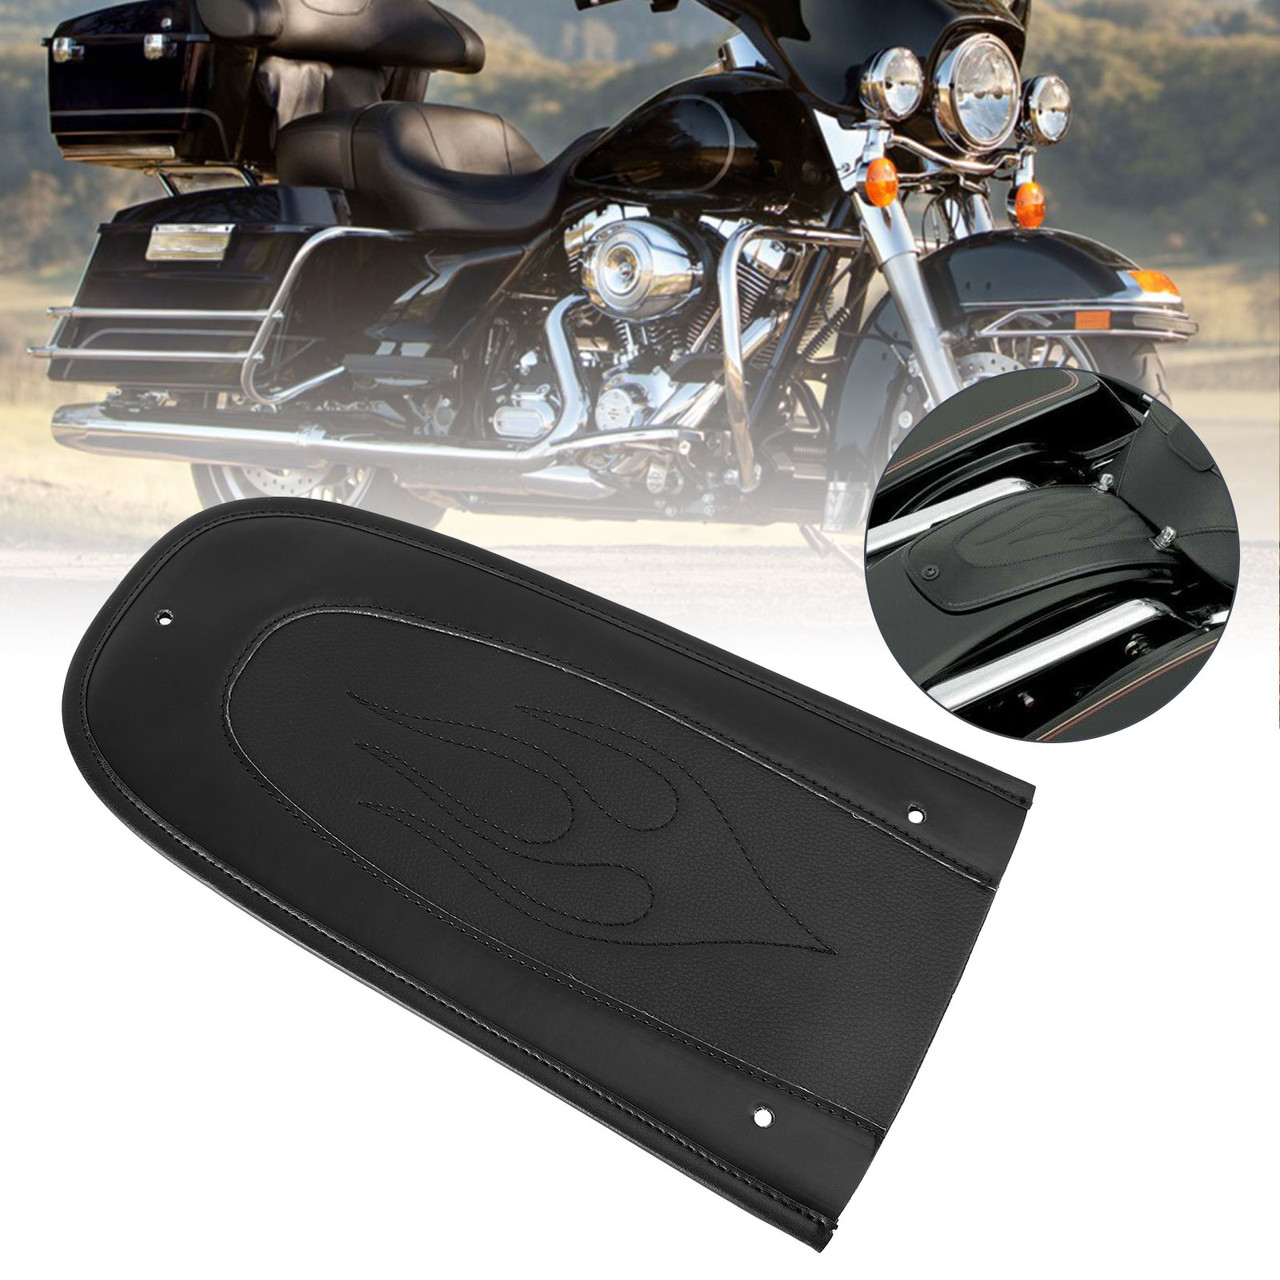 Leather Rear Fender Fit For harley Touring Electra Glide Classic CVO FLHTCSE : 2004 Touring Road King CVO EFI FLHRSEI : 2002 BLK